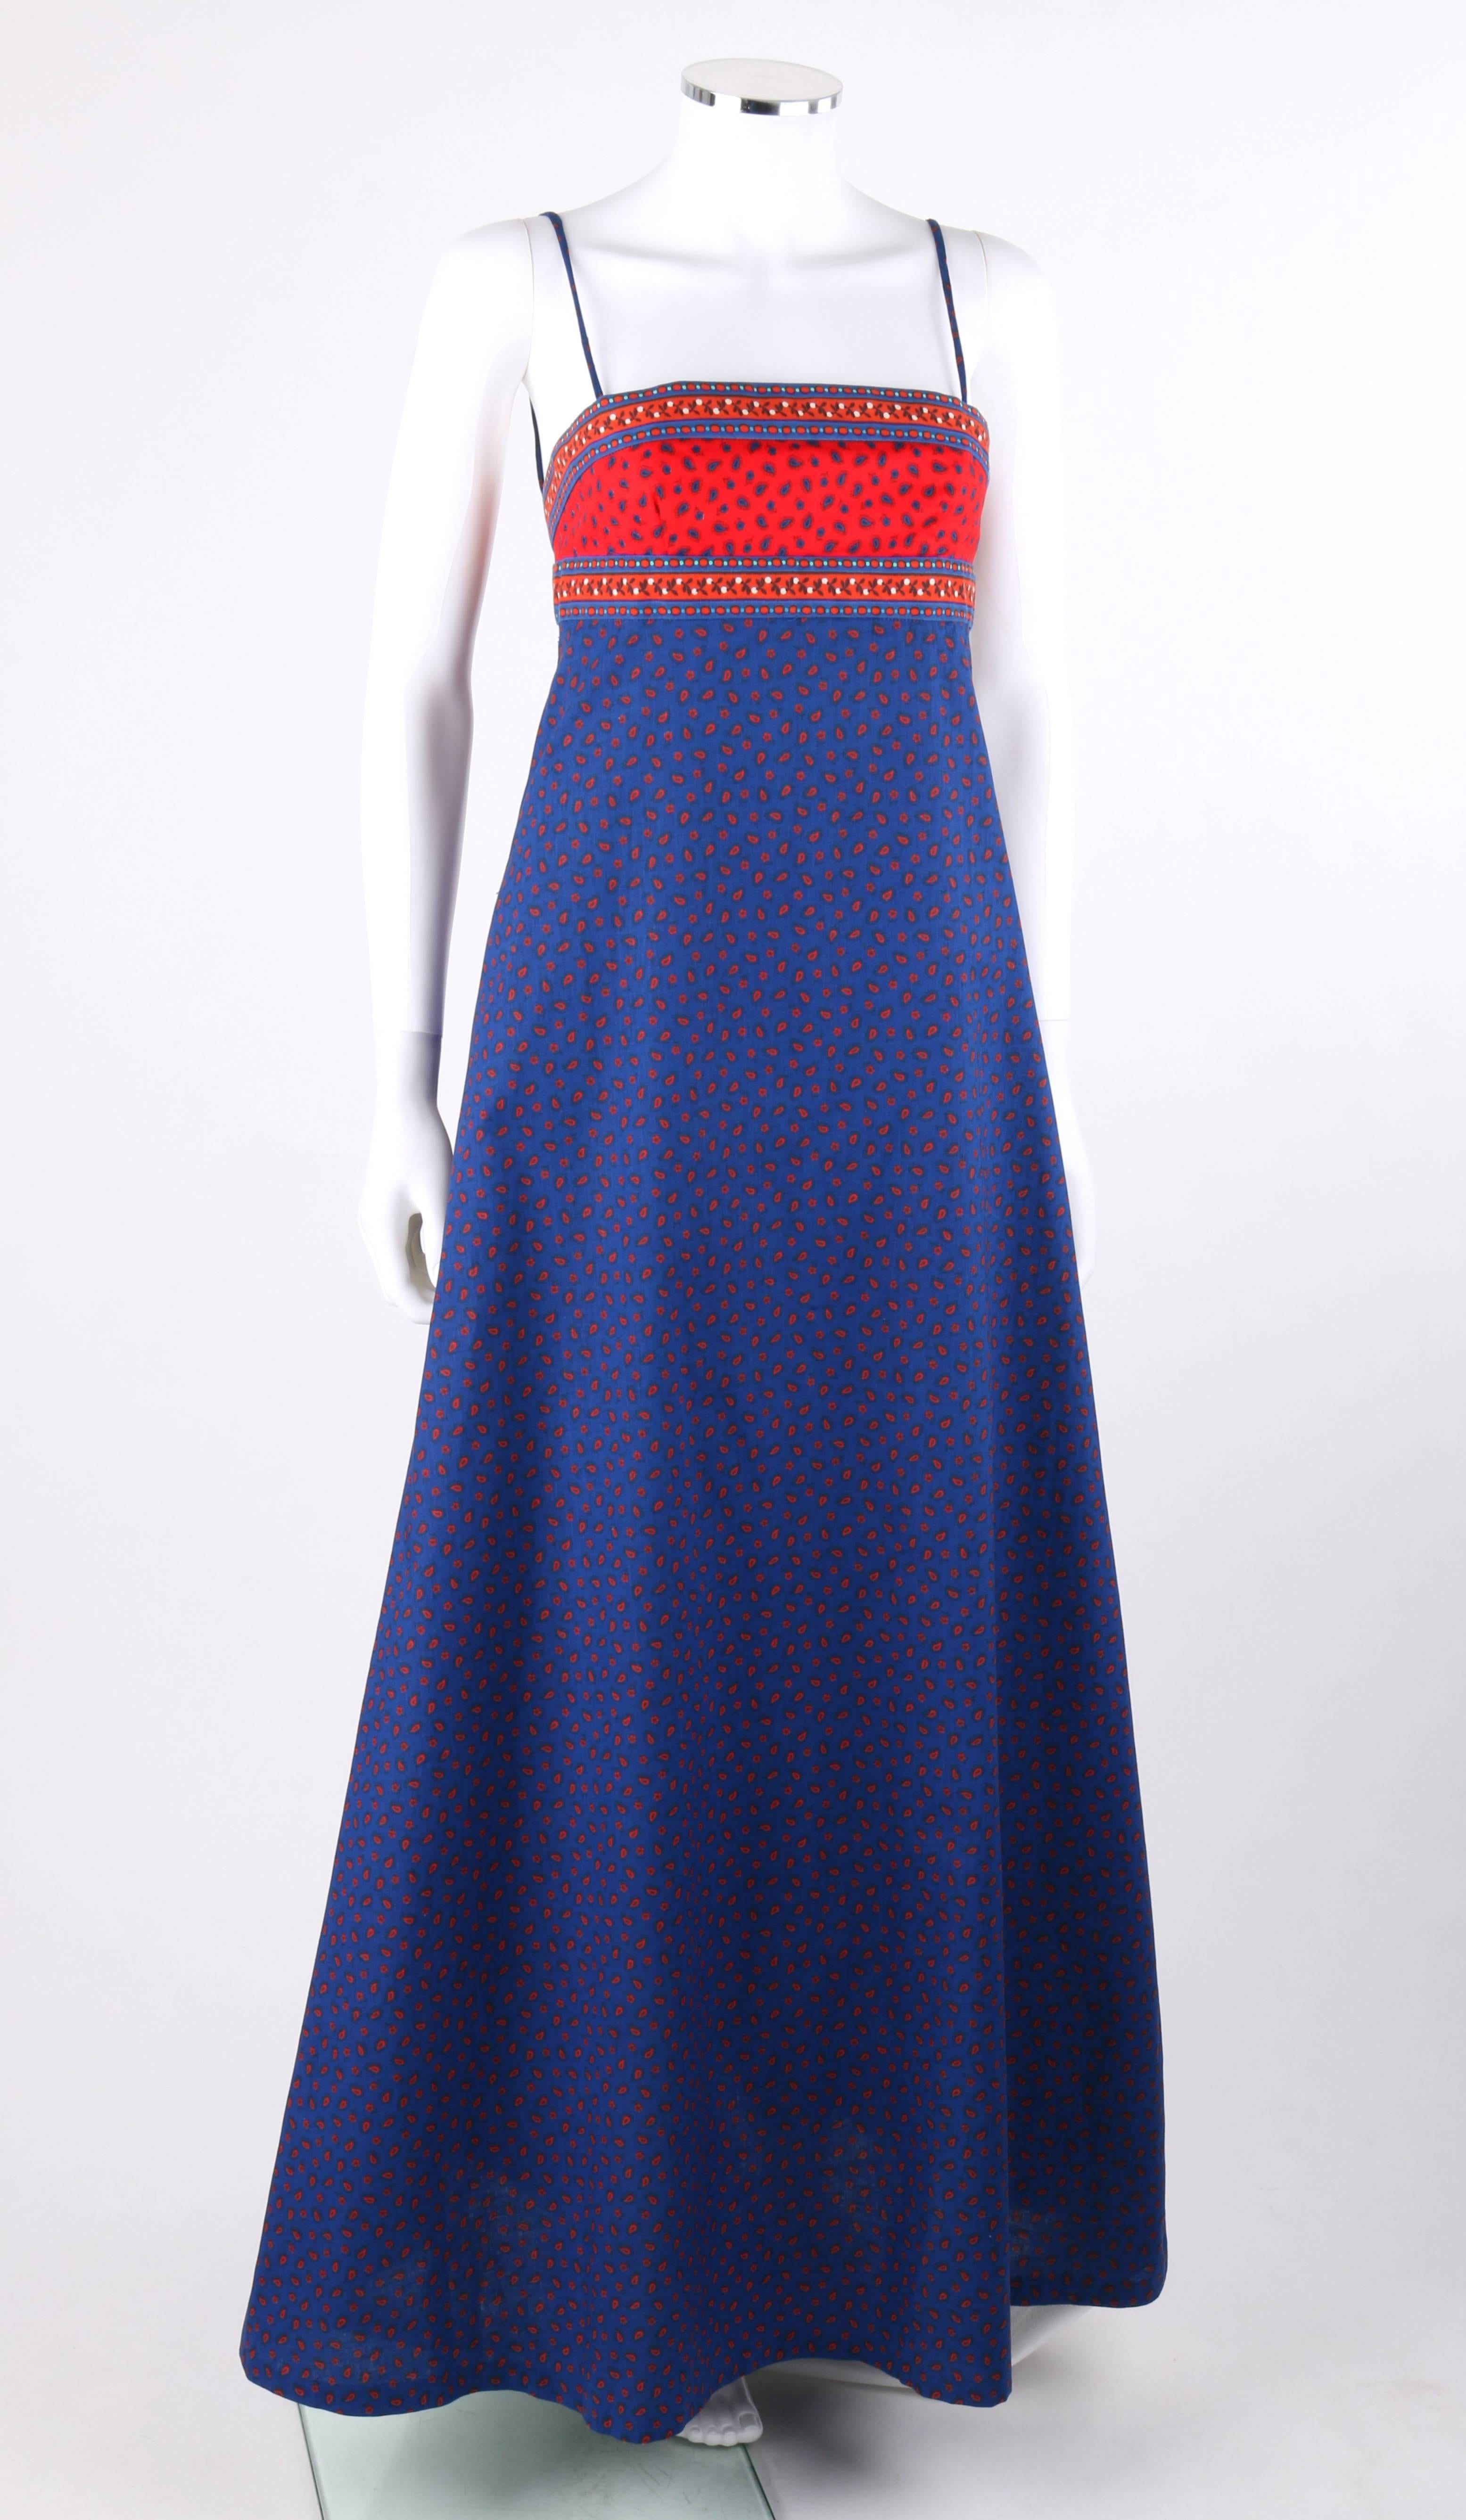 Vintage Anne Klein c.1970's blue and red floral paisley print empire waist maxi dress. Designed by Donna Karen. Spaghetti straps. Empire waist. Floral boarder print at top of bodice and waistline. Low back with double bow detail. Center back zipper